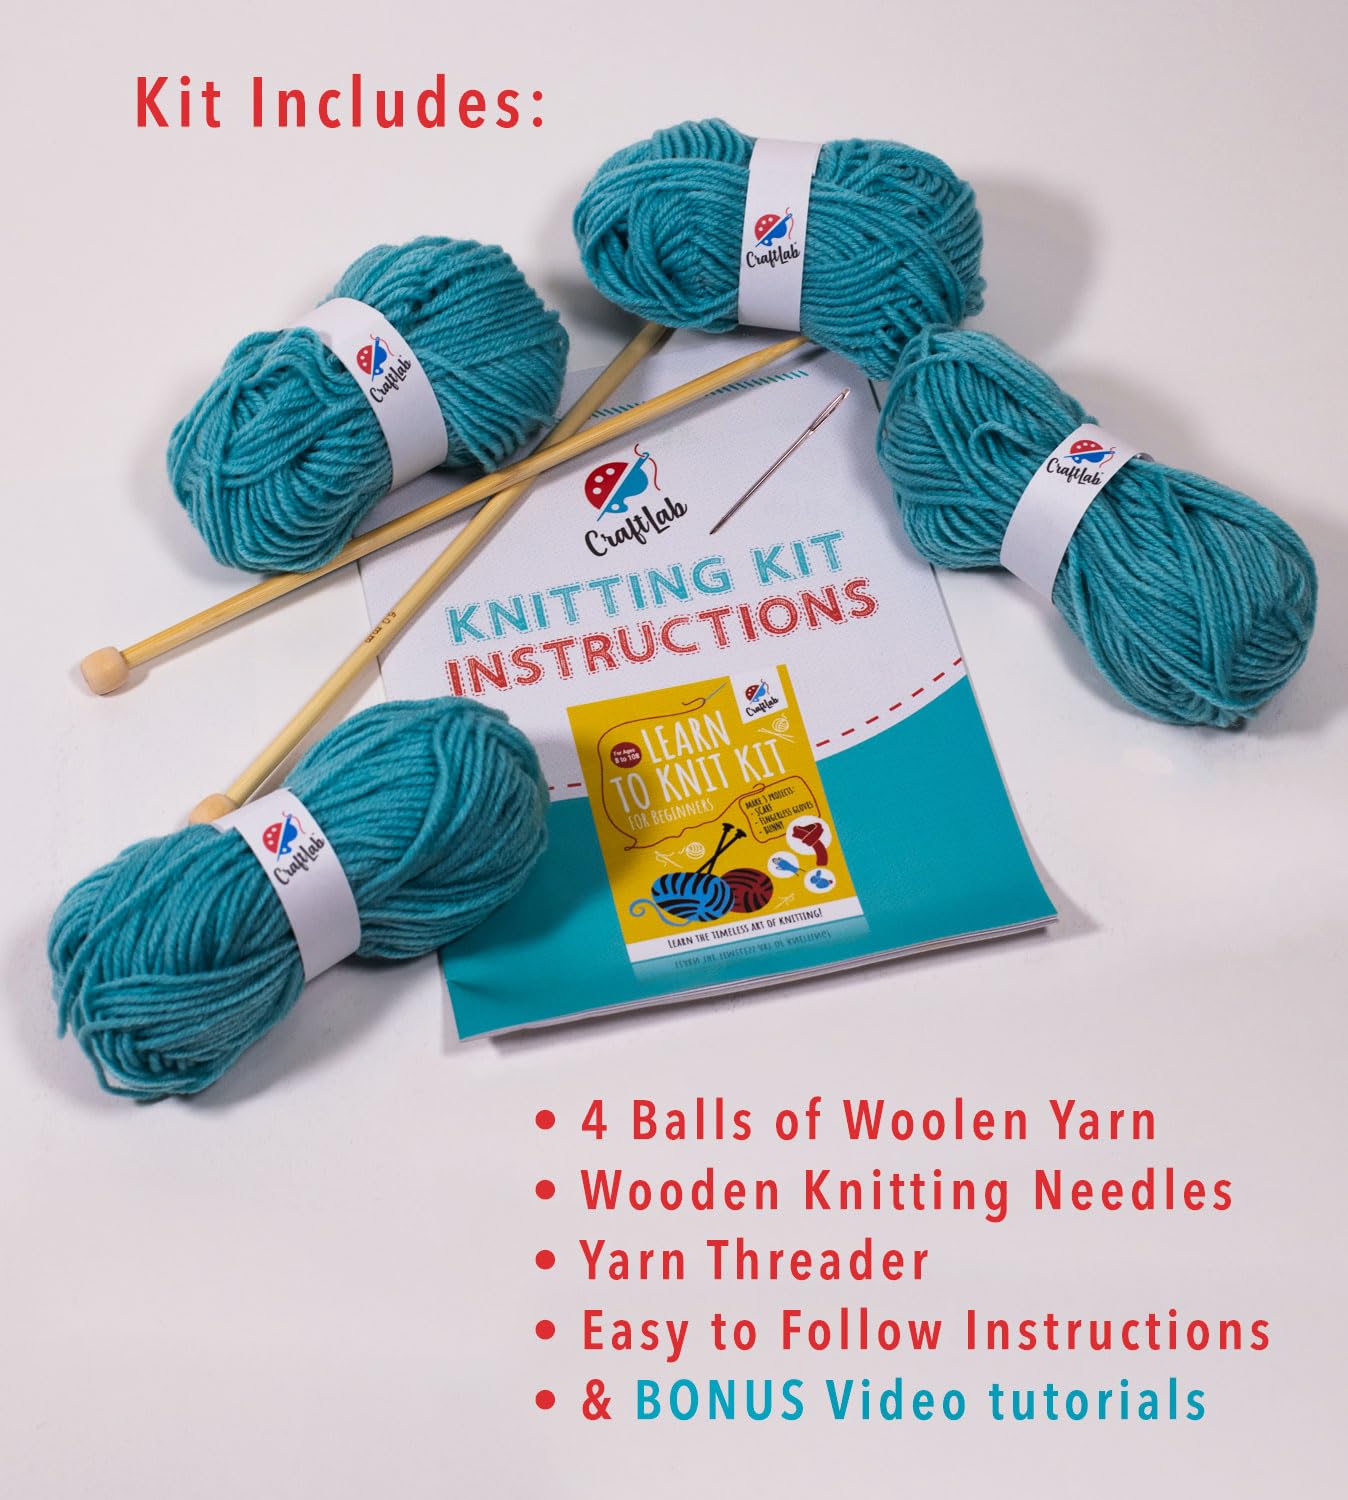 CraftLab Knitting Kit for Beginners, Kids and Adults Includes All Knitting Supplies: Wool Yarn, Knitting Needles, Yarn Needle and Instructions –